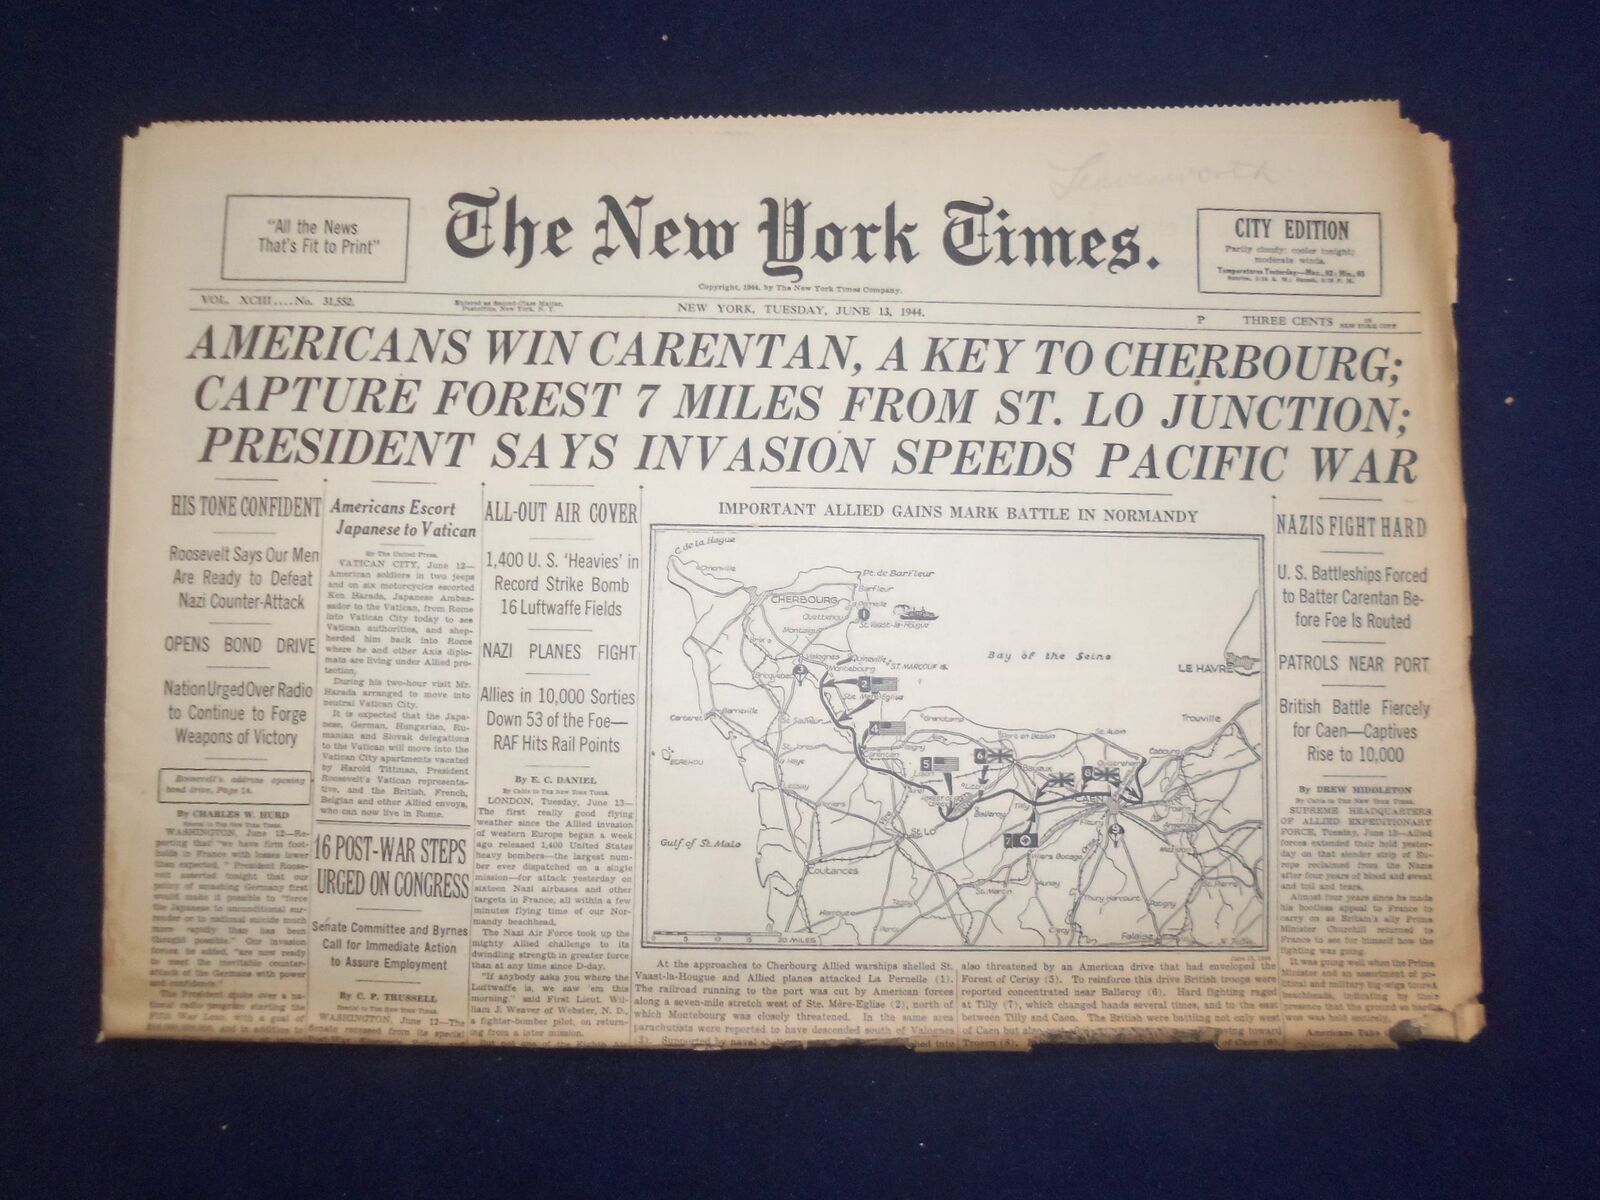 1944 JUNE 13 NEW YORK TIMES -AMERICANS WIN CARENTAN, A KEY TO CHERBOURG- NP 6566